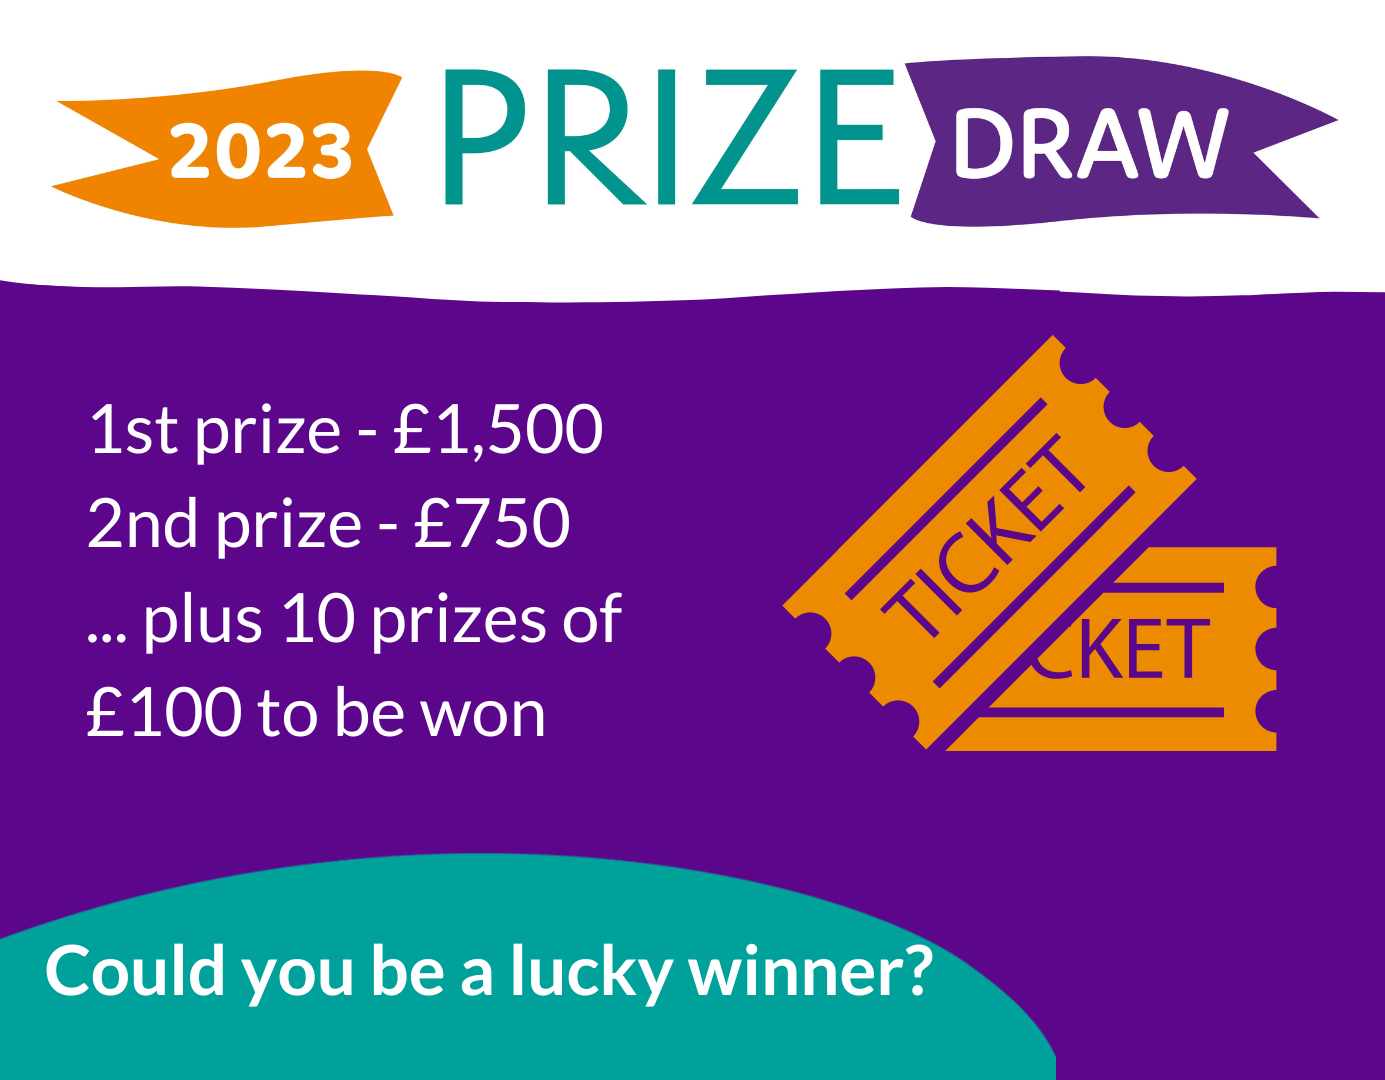 2023 Prize Draw graphic with details of prizes and image of tickets